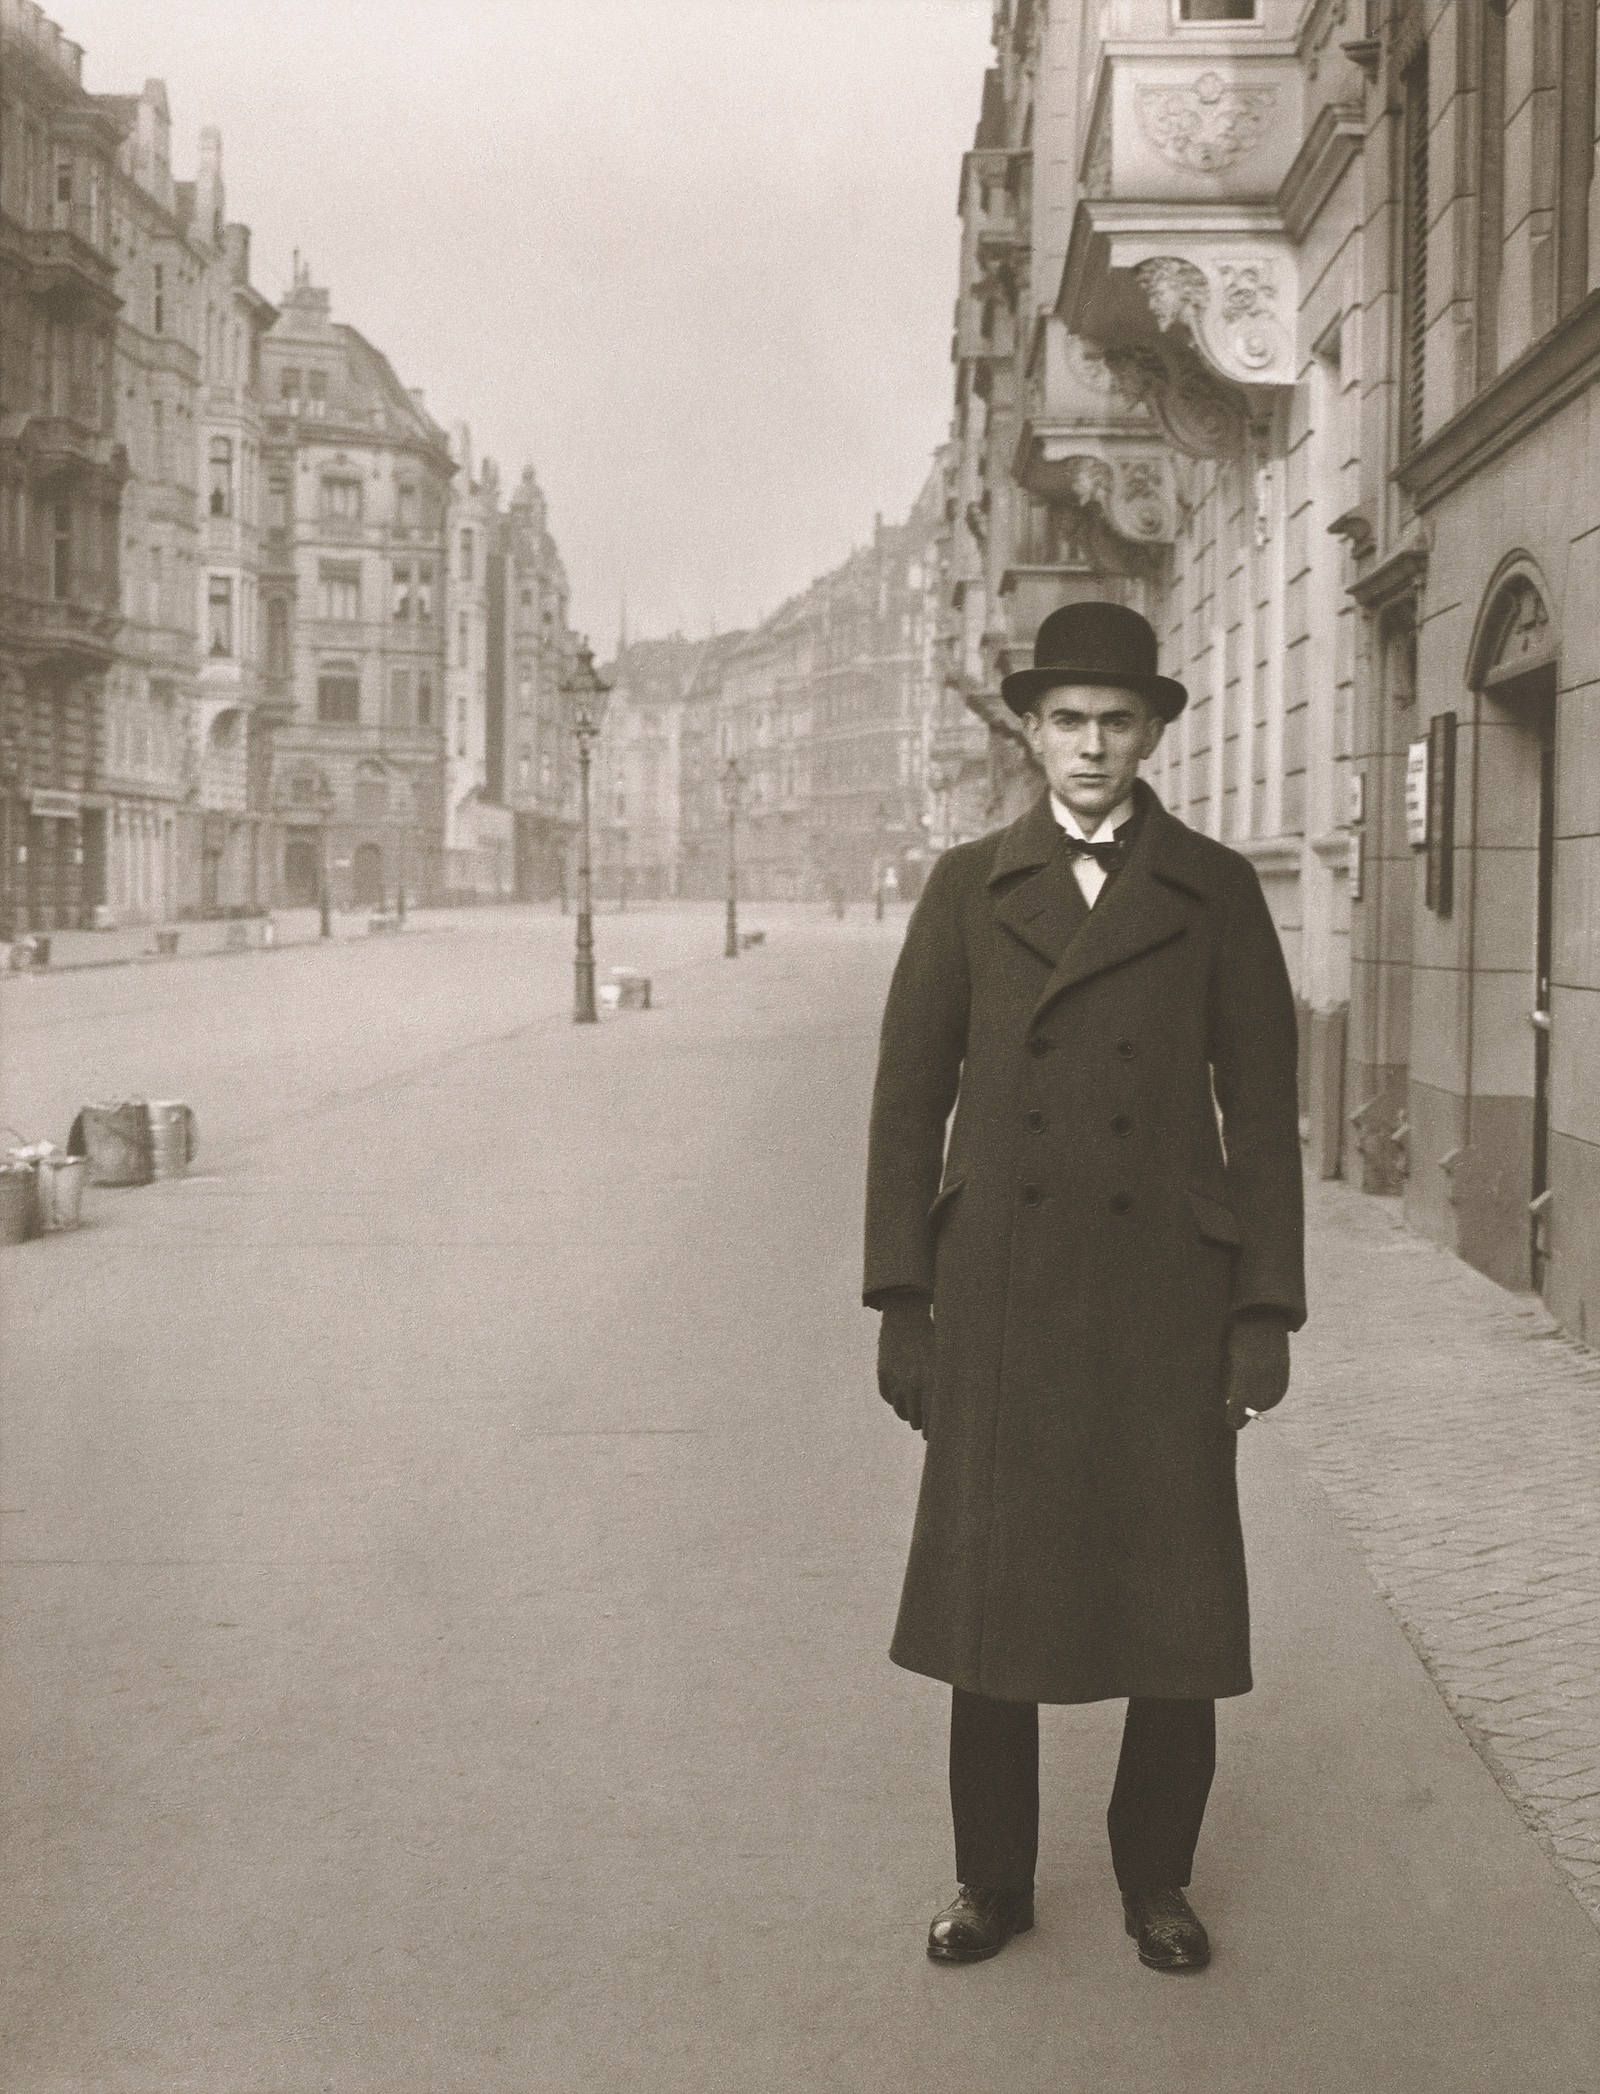 A man in a coat and a bowler hat standing on a deserted street